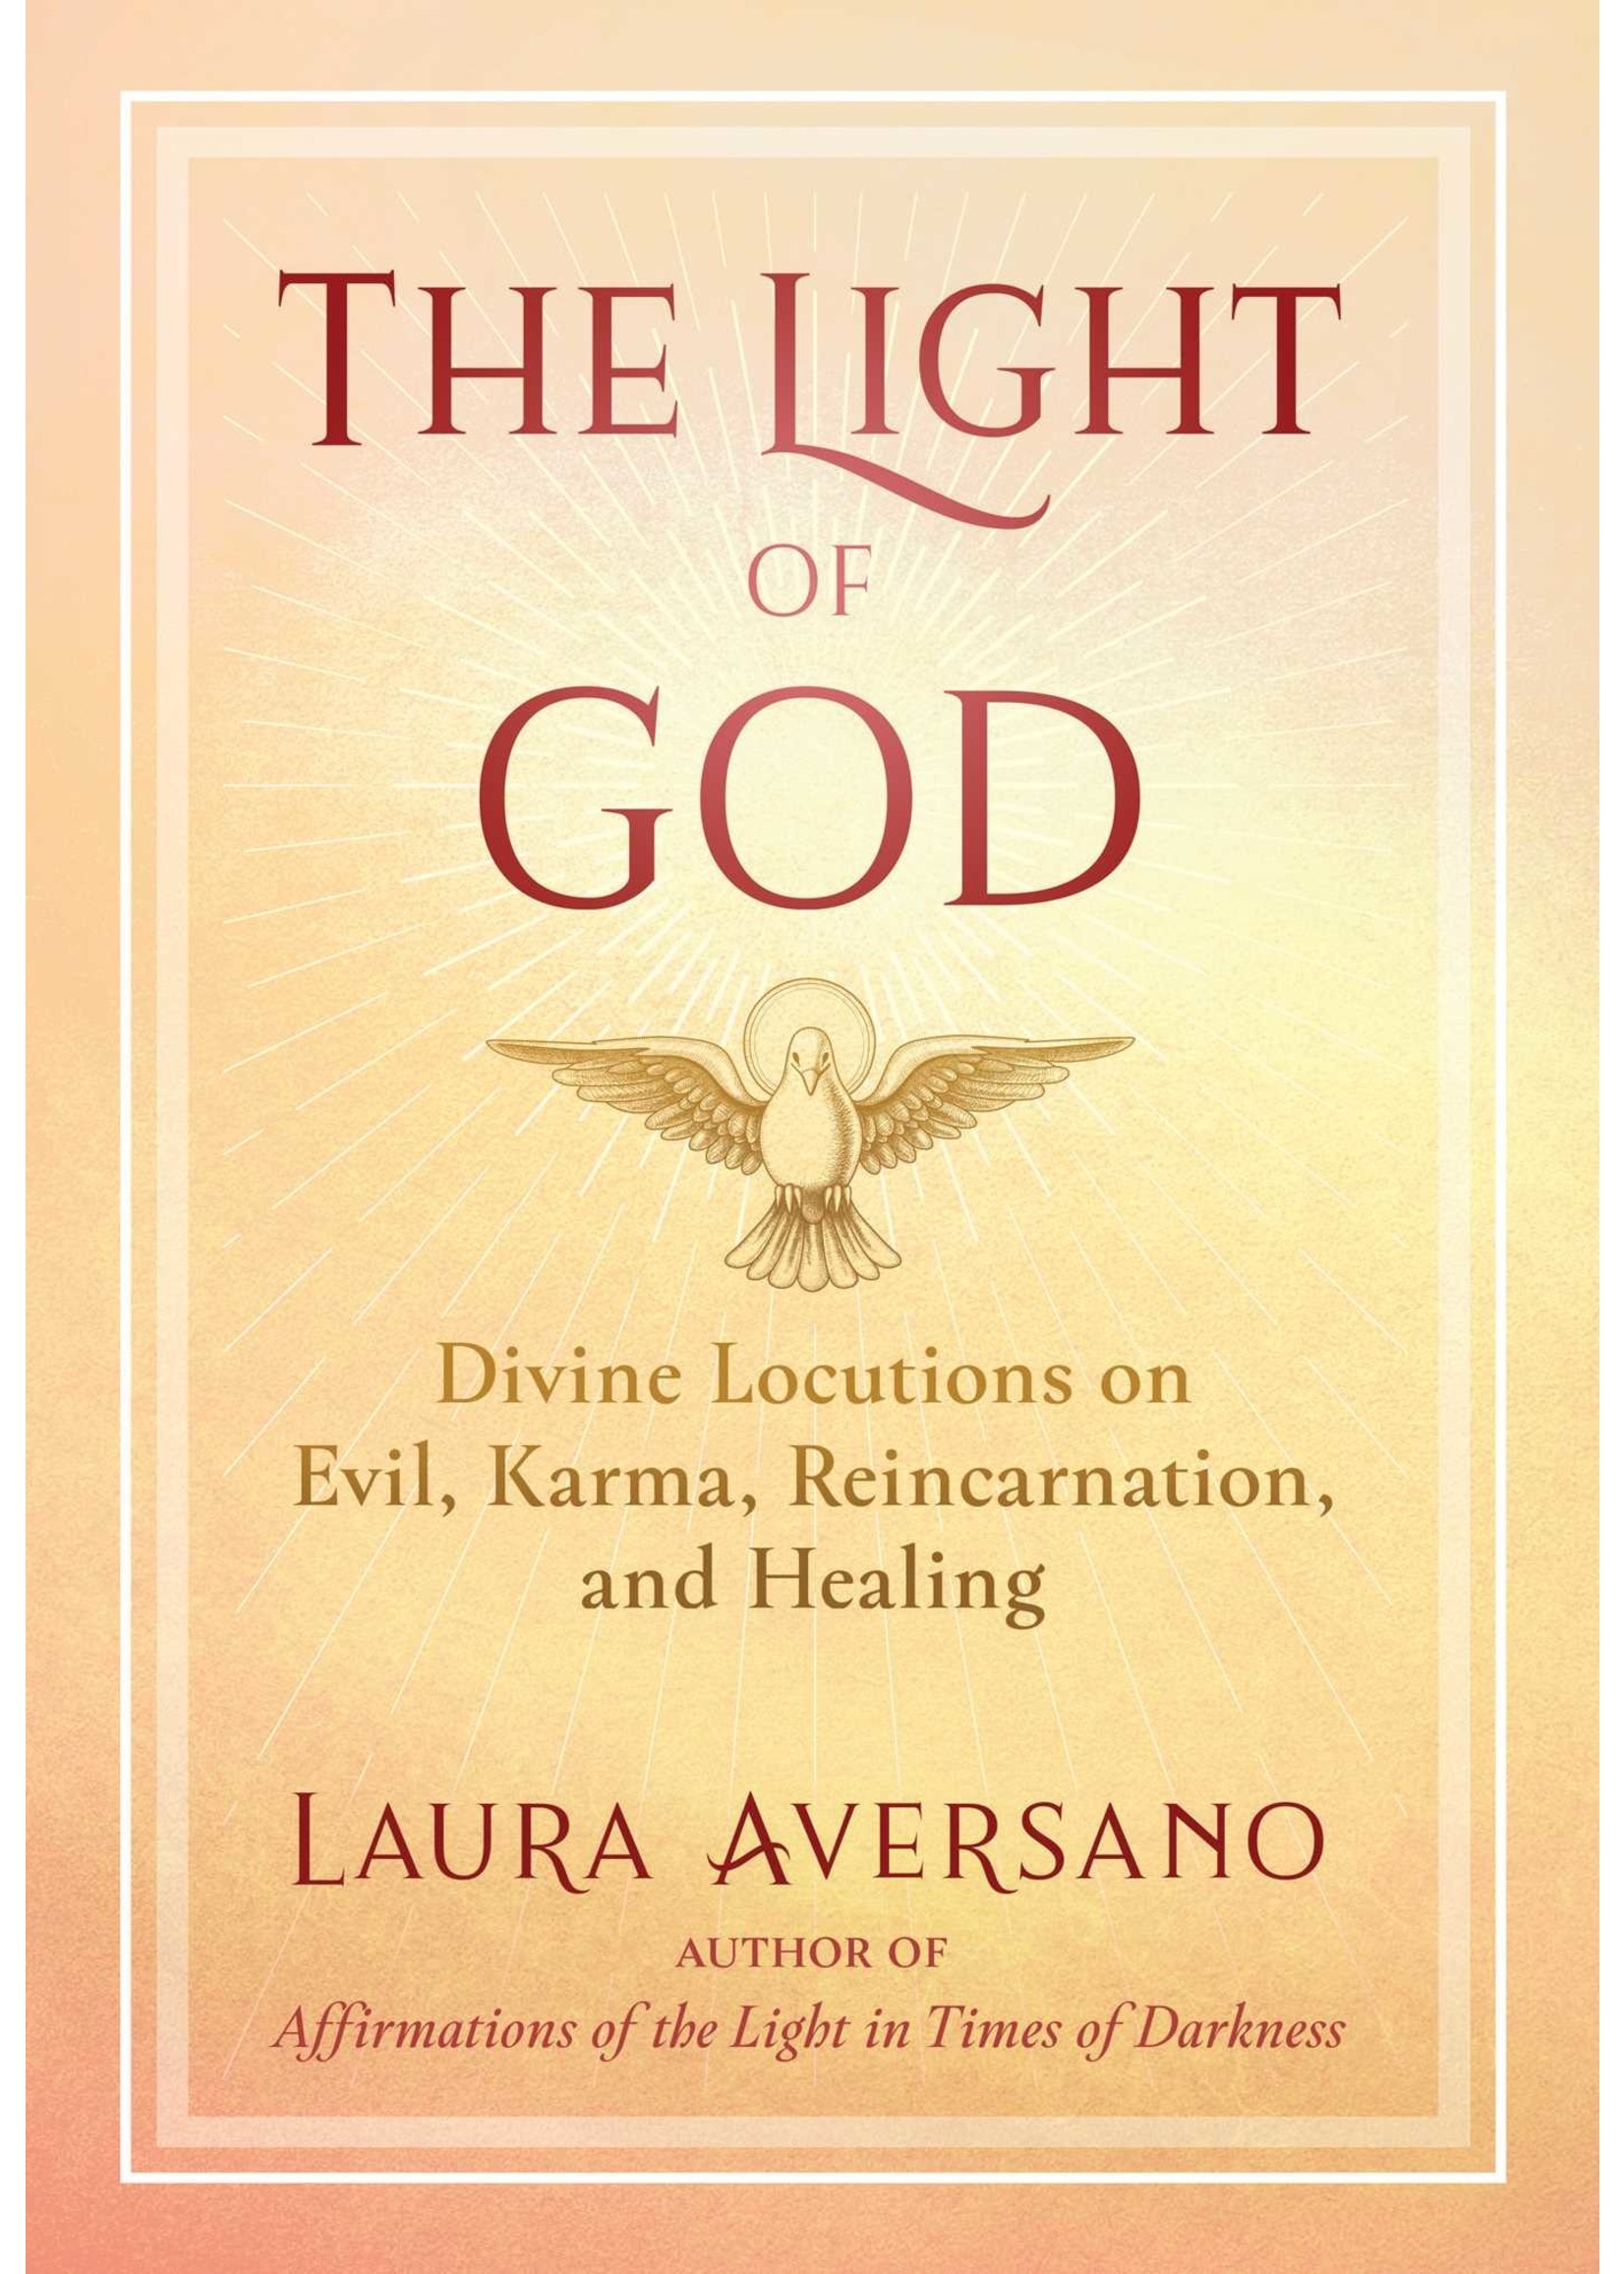 The Light of God: Divine Locutions on Evil, Karma, Reincarnation, and Healing by Laura Aversano